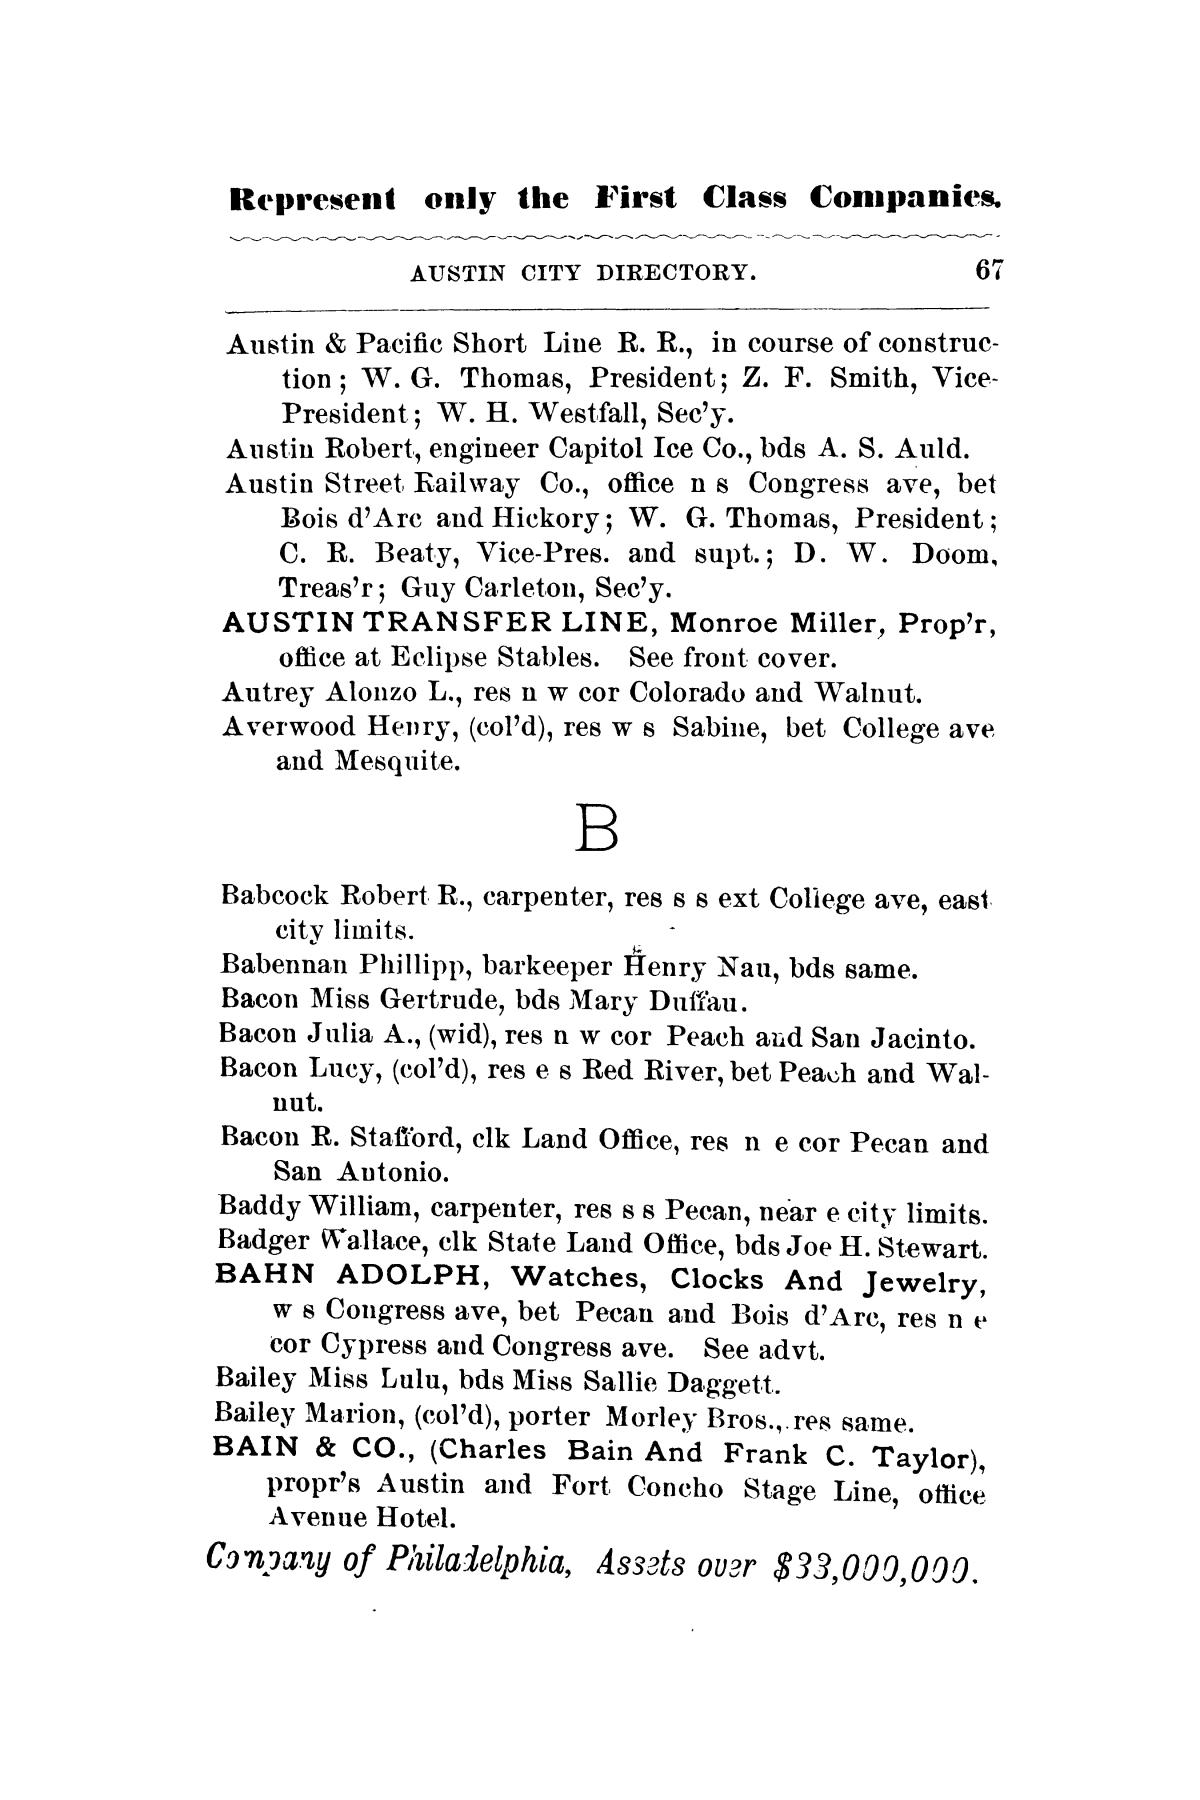 Mooney & Morrison's General Directory Of The City Of Austin, Texas, For 1877-78.
                                                
                                                    67
                                                